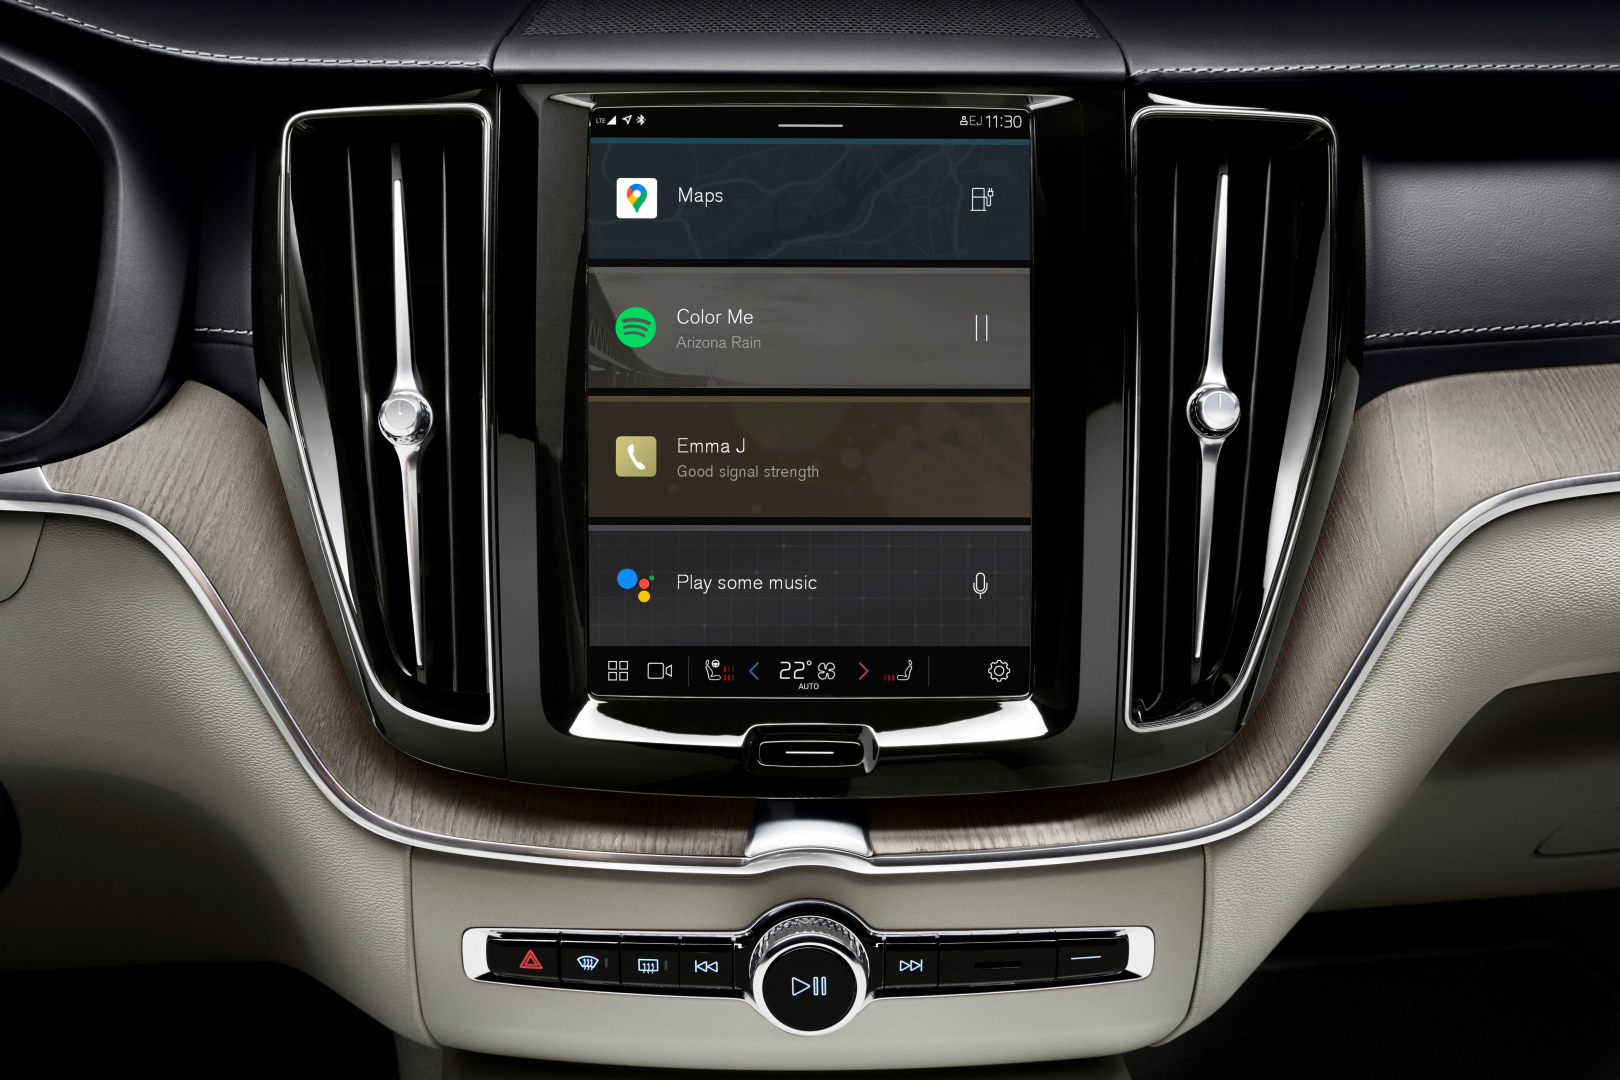 279245_Volvo_Cars_brings_infotainment_system_with_Google_built_in_to_more_models